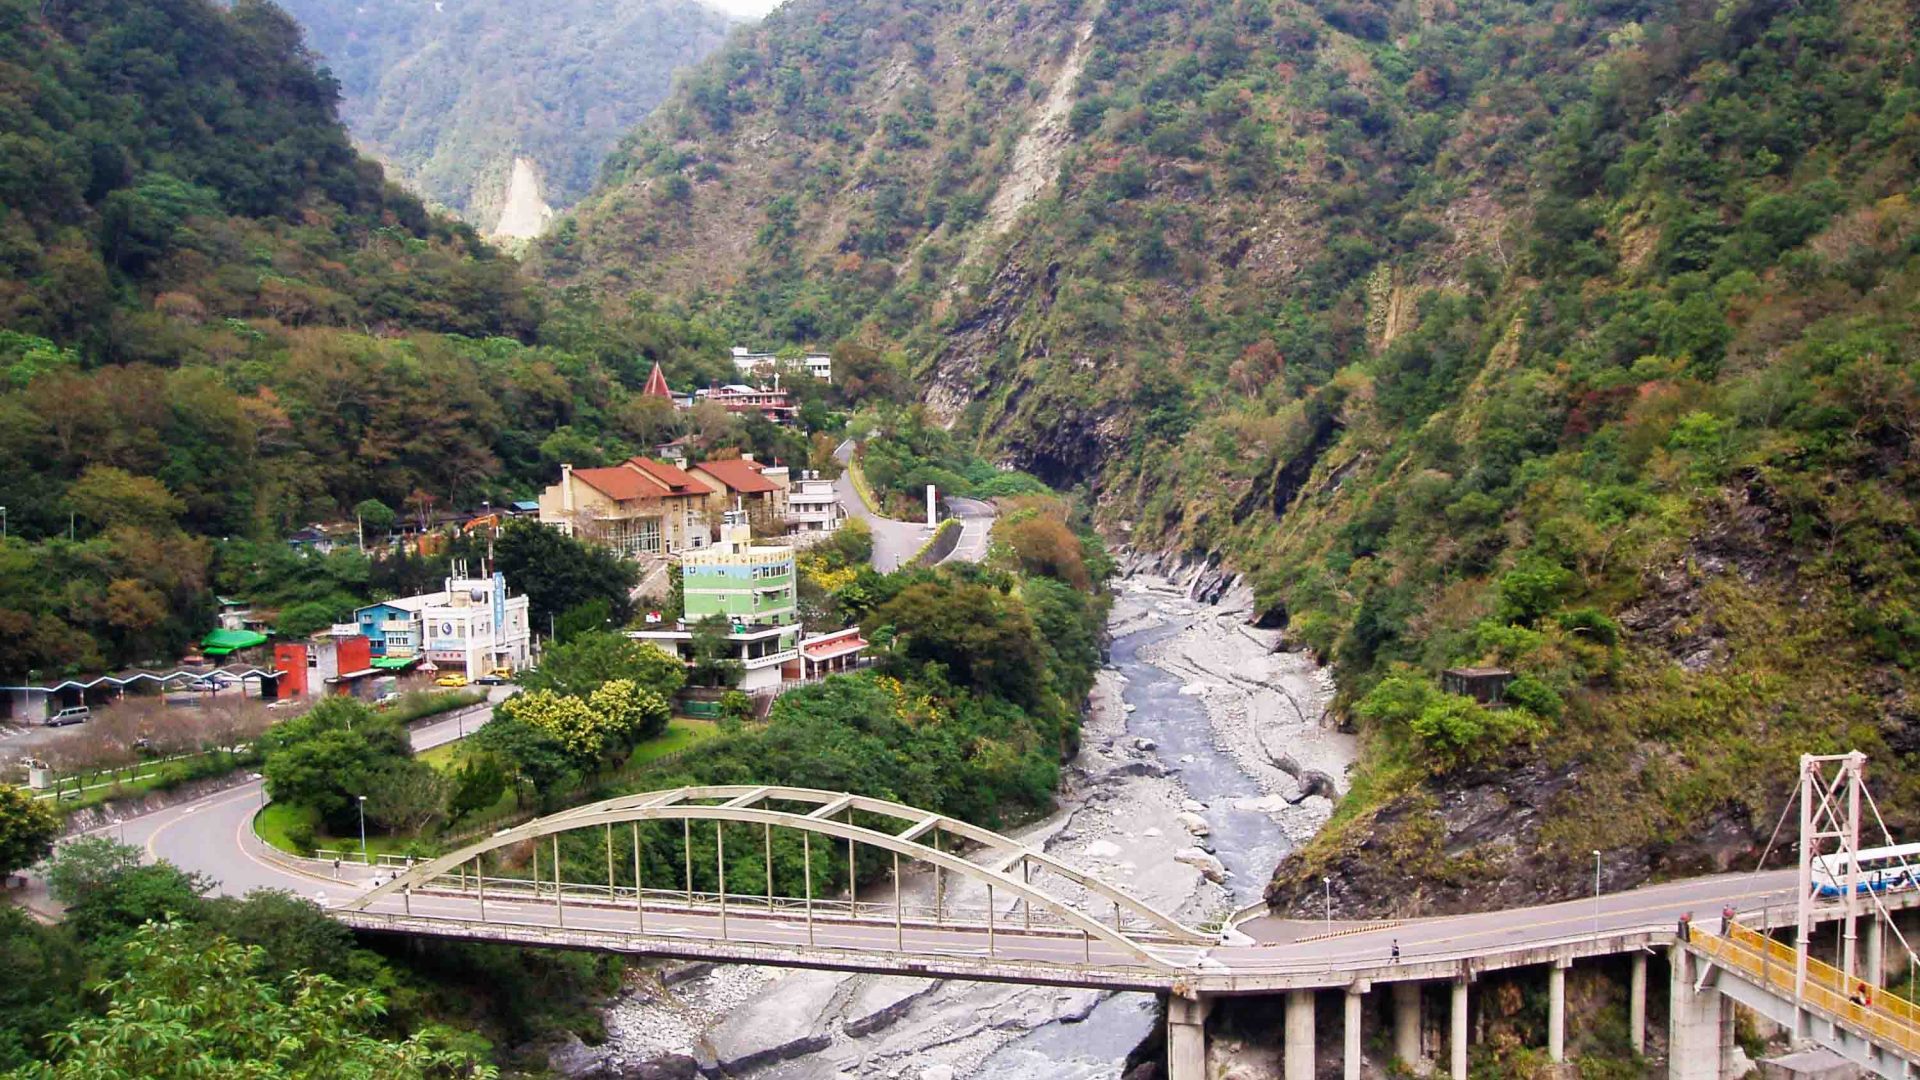 A bridge over a gorge with a small town to the left, flanking the water.